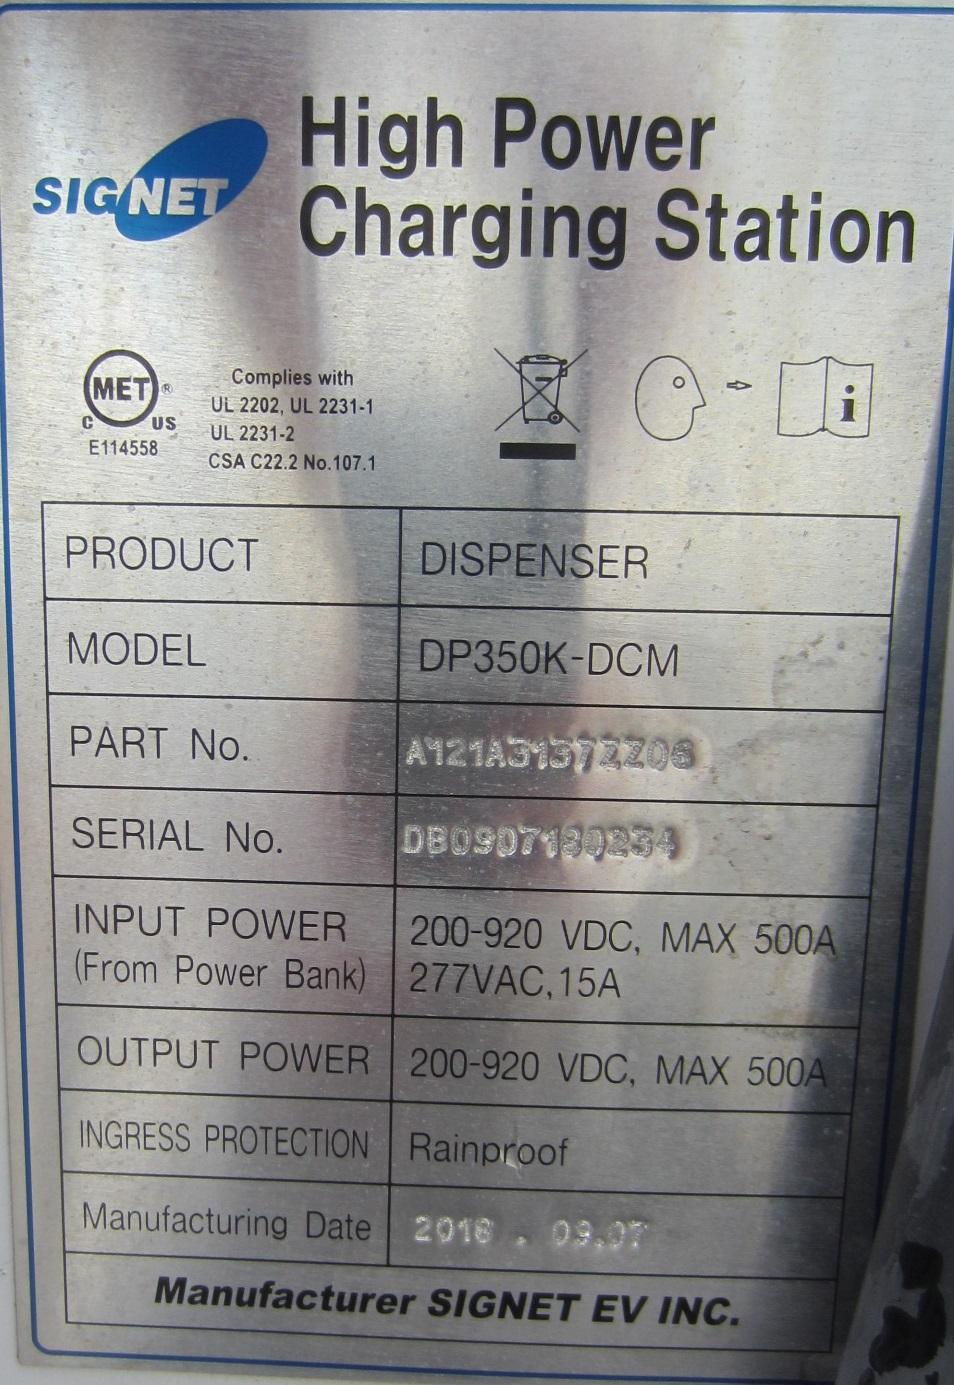 Close-up of a charging station label

Description automatically generated